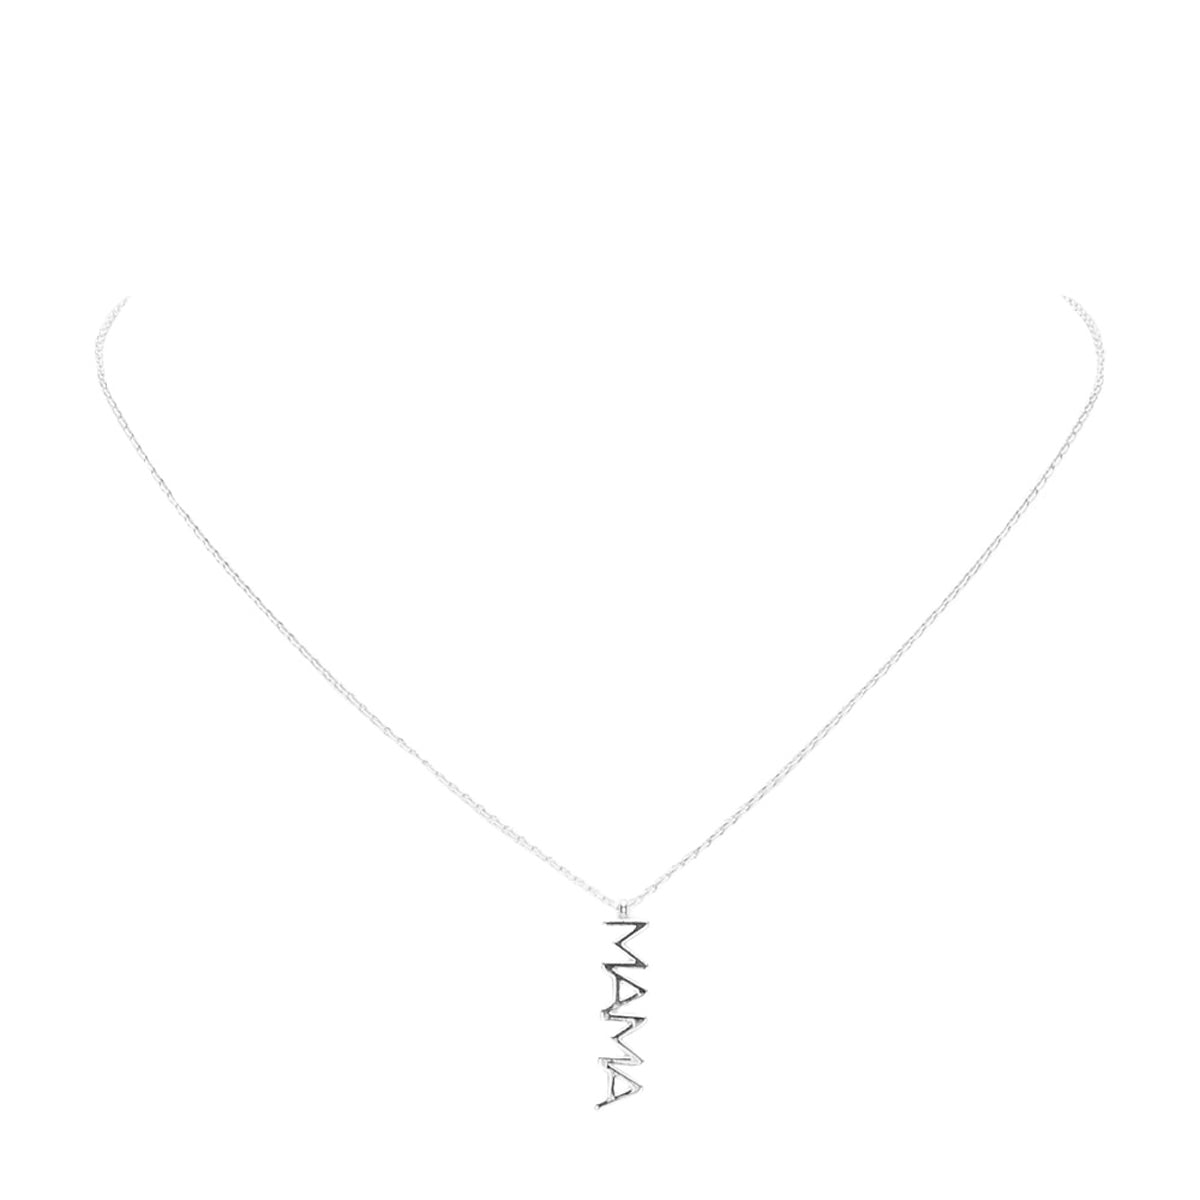 Rhodium White Gold Dipped Mama Metal Message Pendant Necklace, these MAMA dipped necklace can light up any outfit, and make you feel absolutely flawless. Fabulous fashion and sleek style adds a pop of pretty color to your attire. Make your mother feel special by giving this MAMA Metal pendant necklace as a gift and expressing your love for your mother on this Mother's Day.